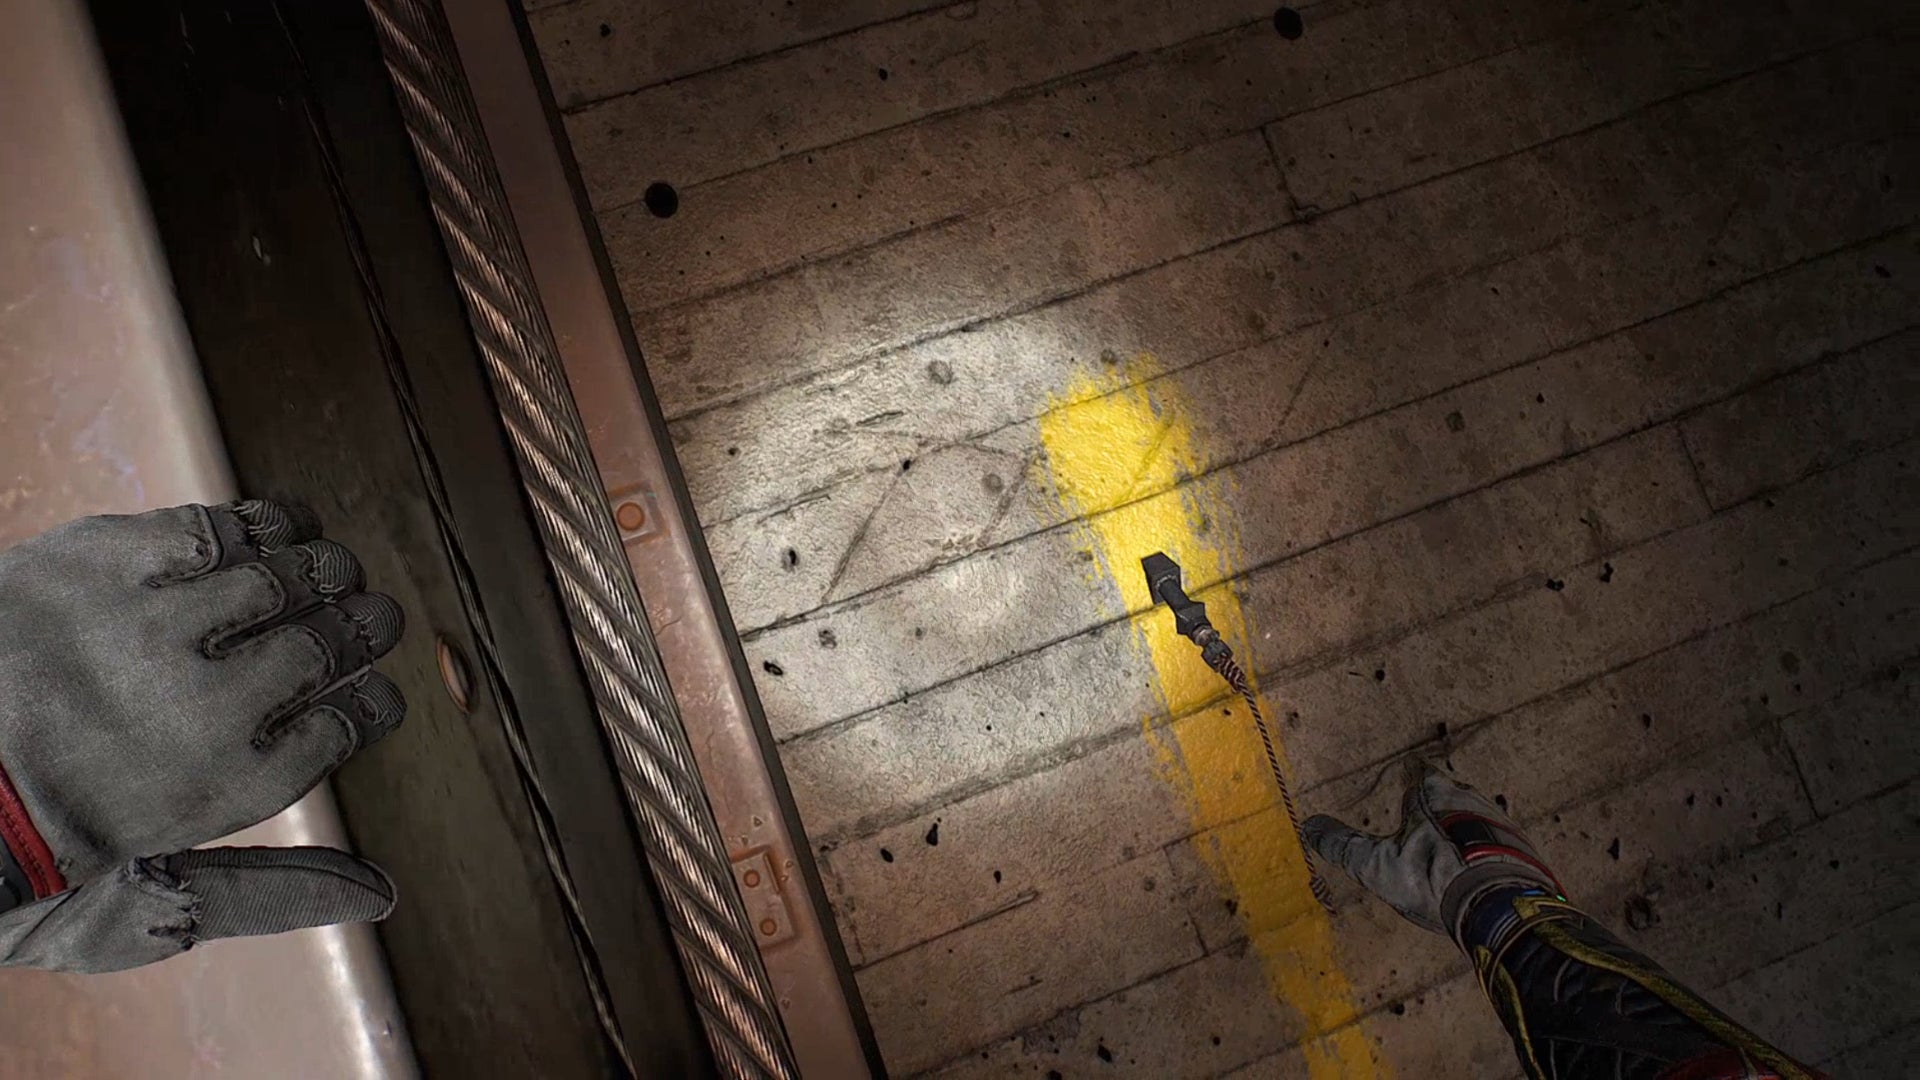 The player reaches for the Grappling Hook tool embedded in a wall in Dying Light 2.